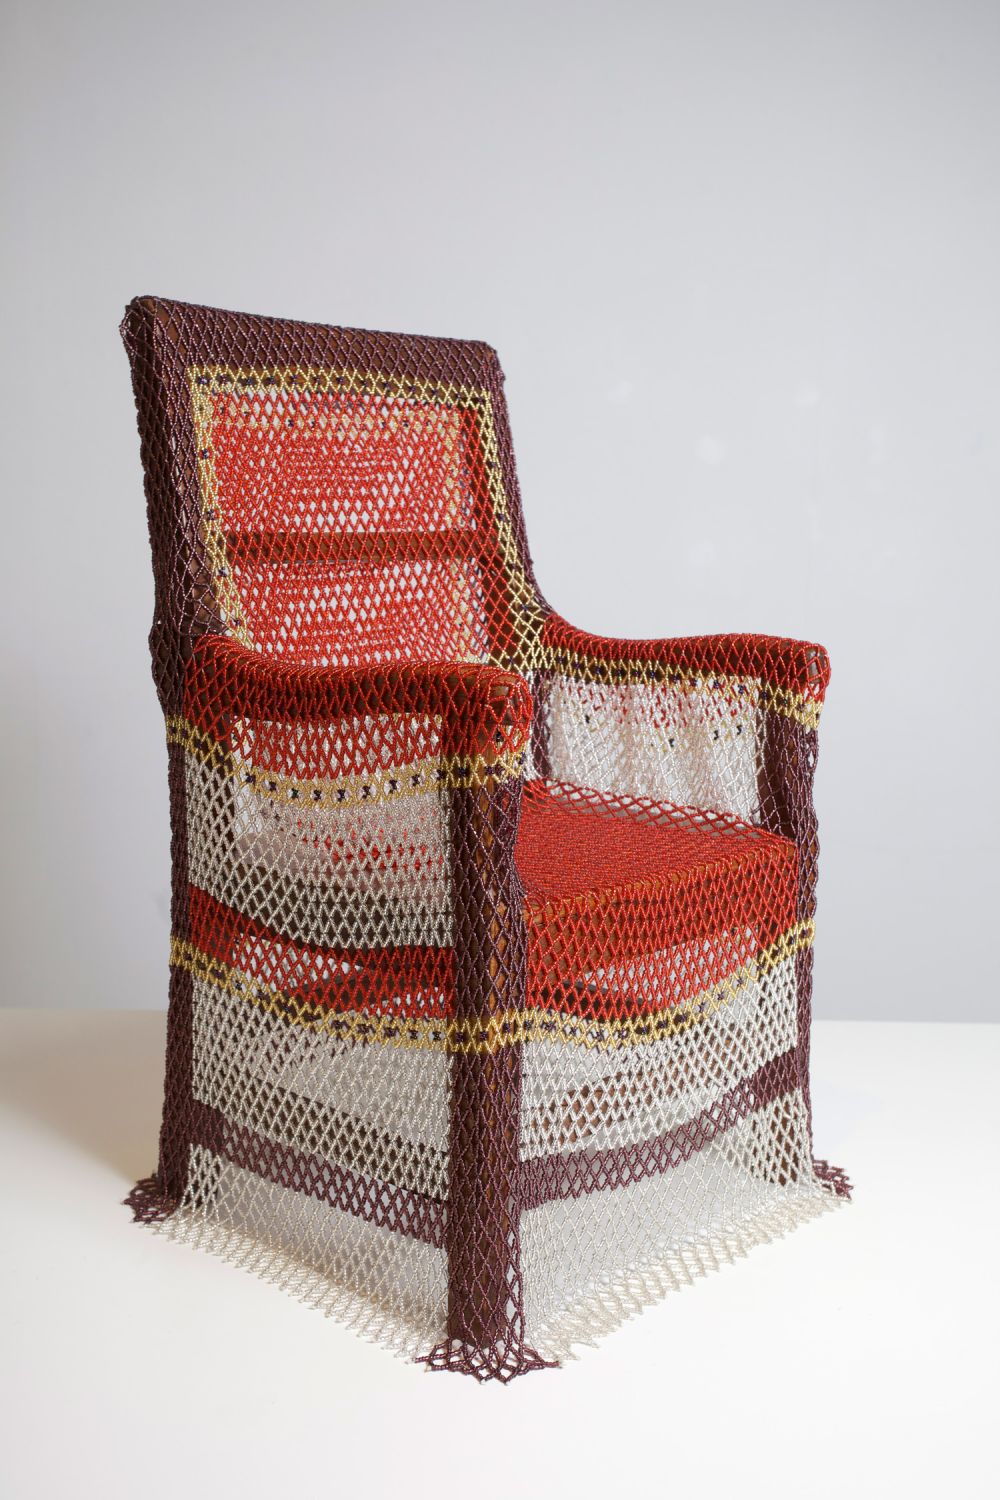 A chair covered in a woven textile